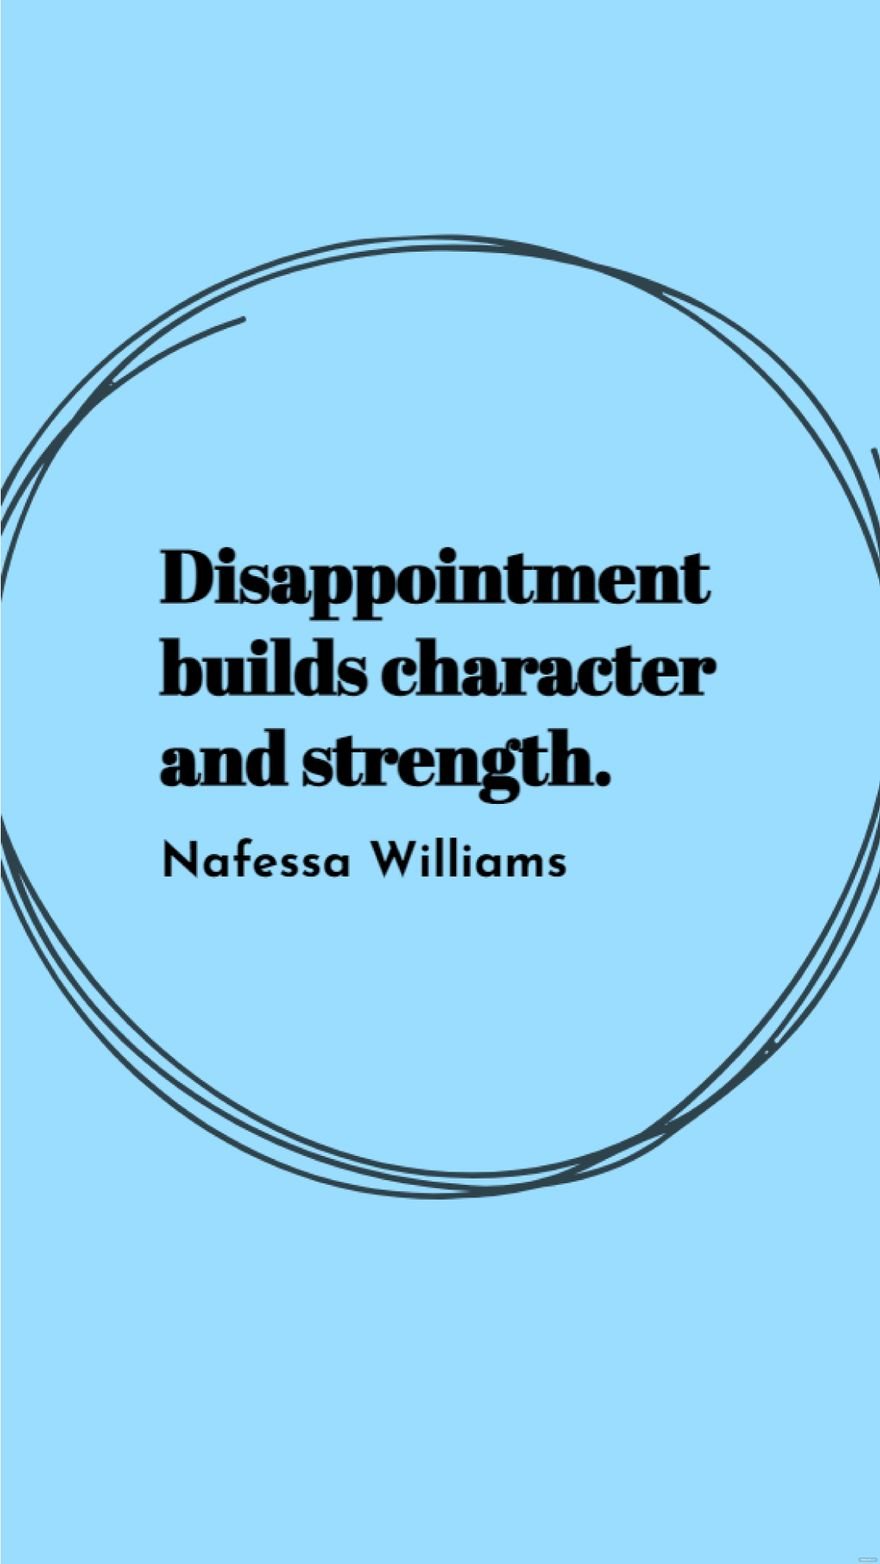 Nafessa Williams - Disappointment builds character and strength.